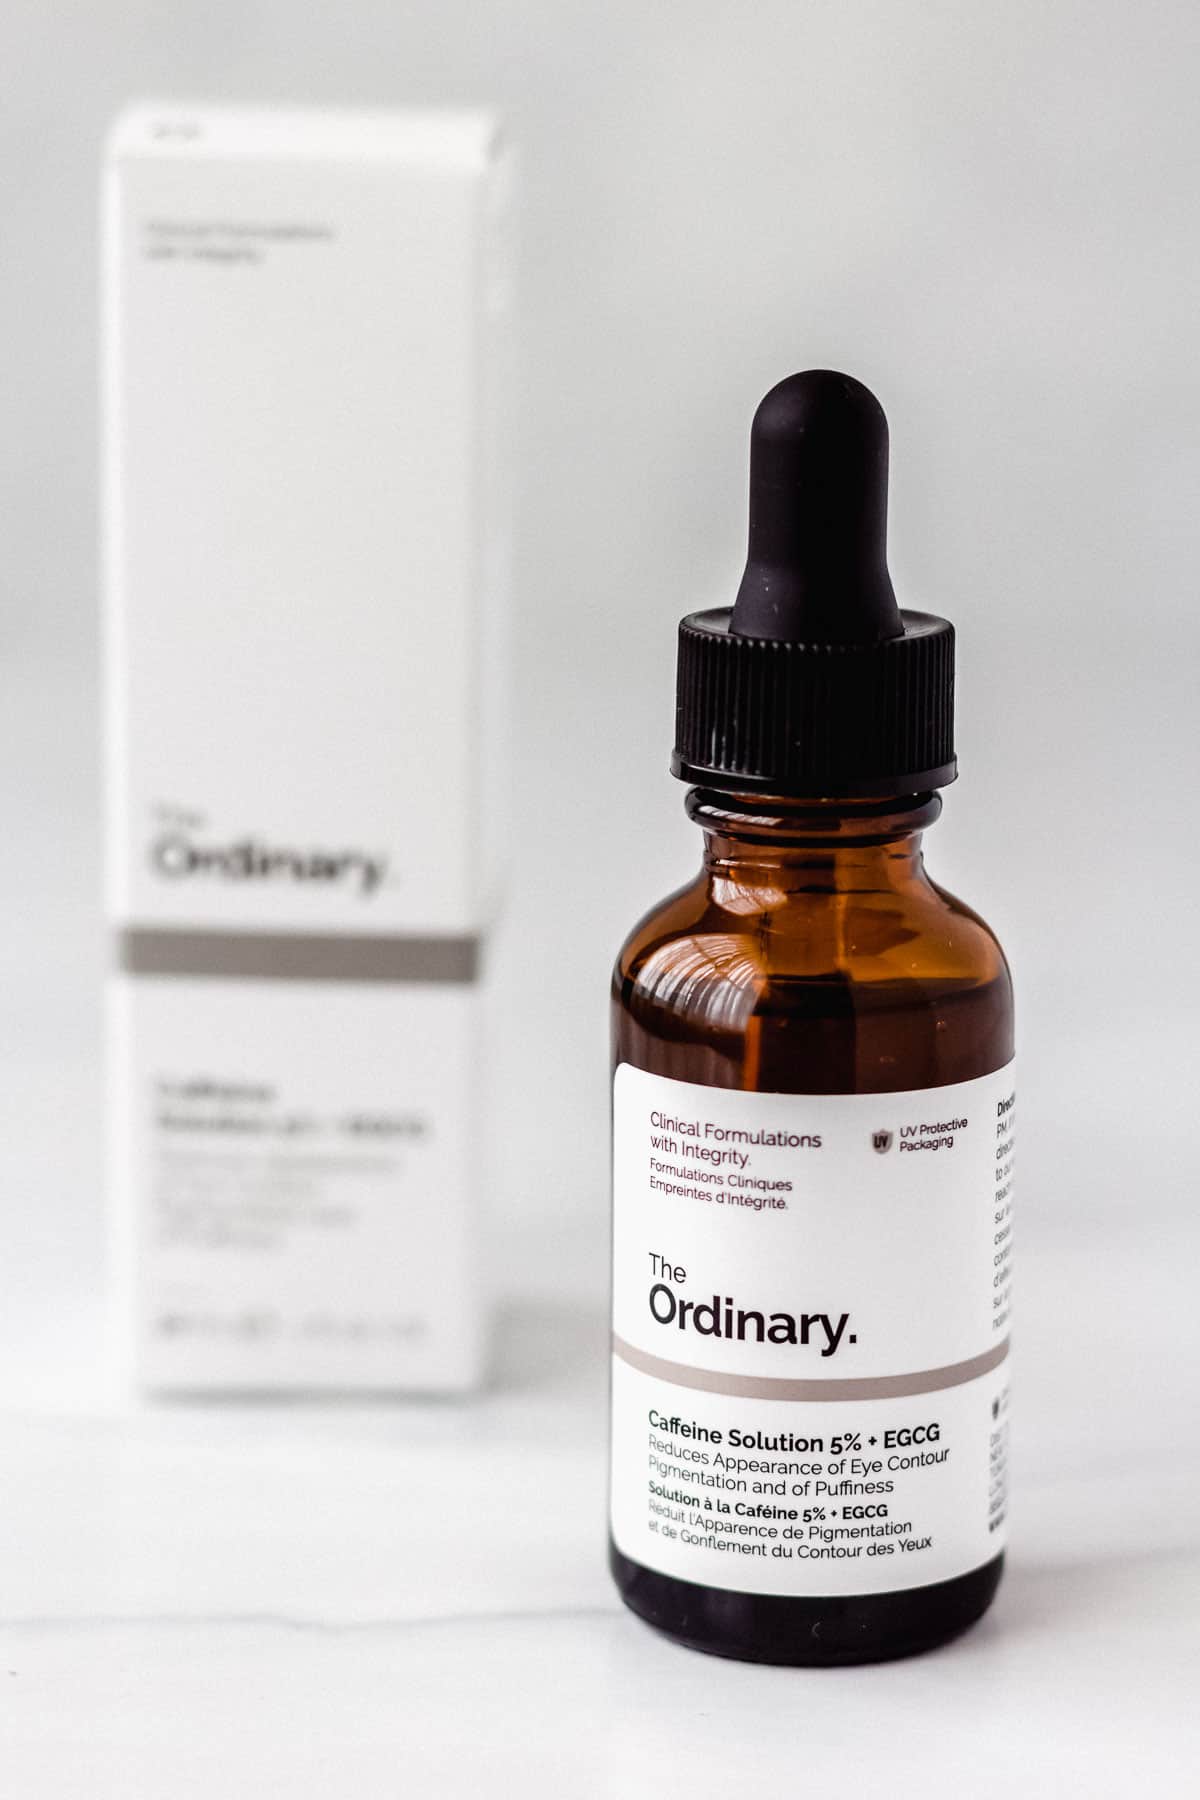 The Ordinary Caffeine Solution 5% + EGCG bottle and box on a white background